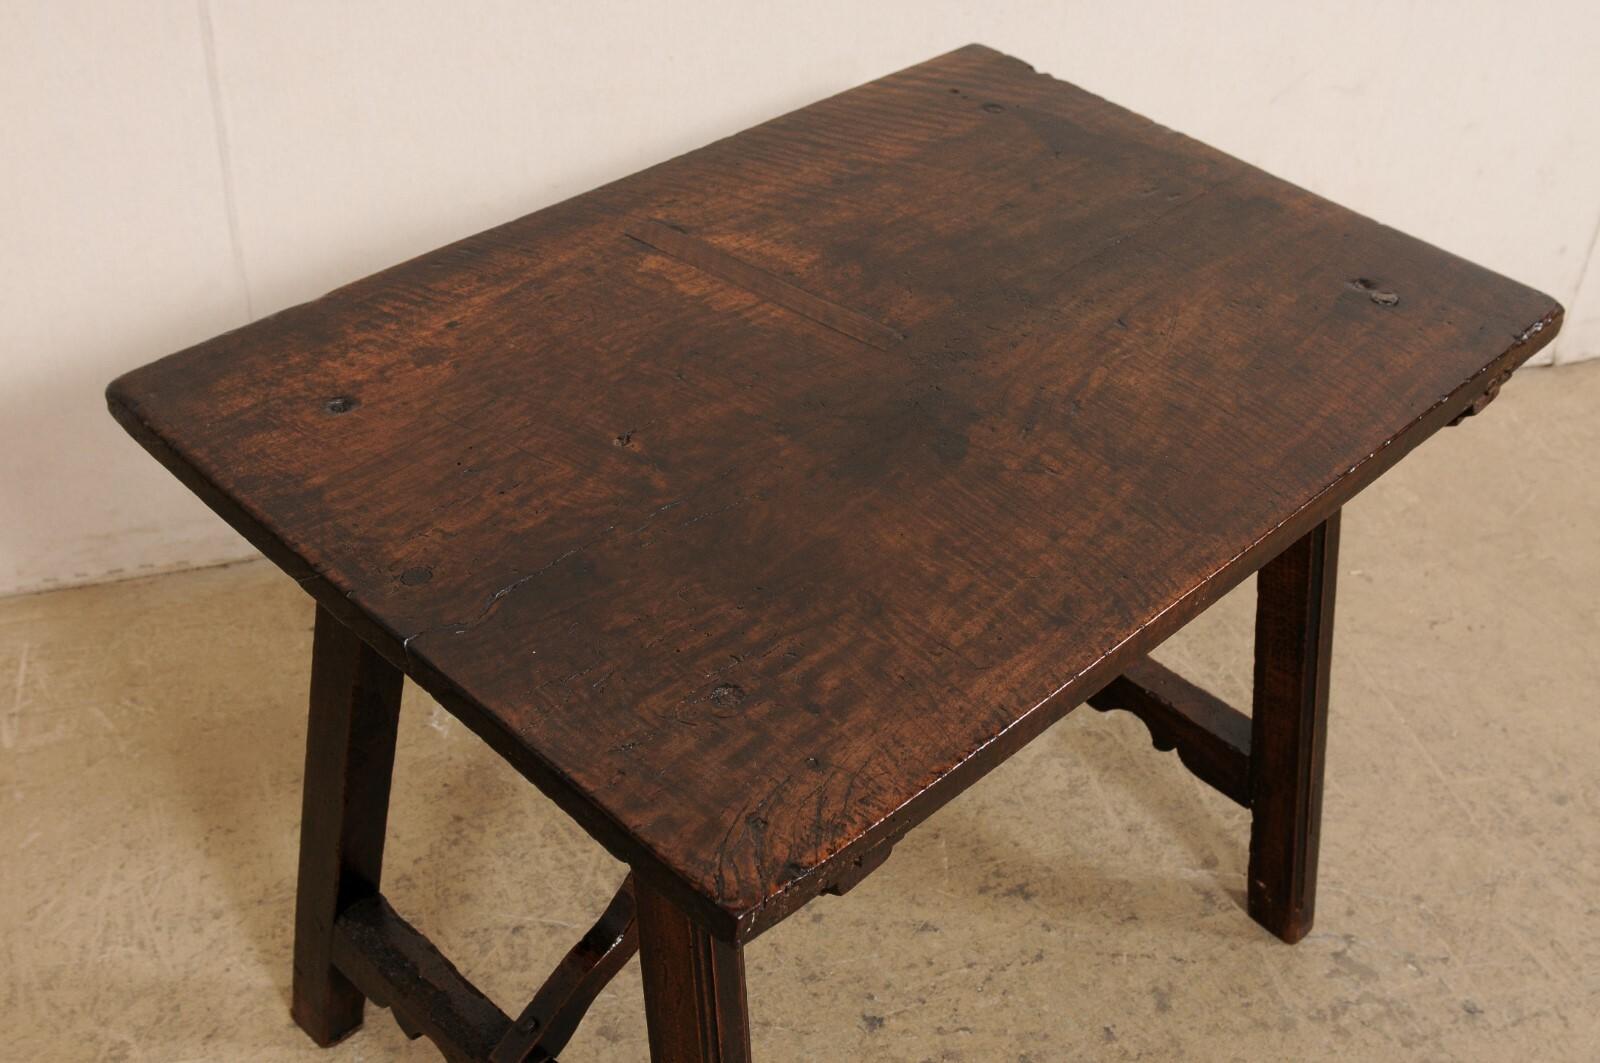 18th Century and Earlier 18th C. Spanish Table with a Wavy X-Stretcher at Underside For Sale